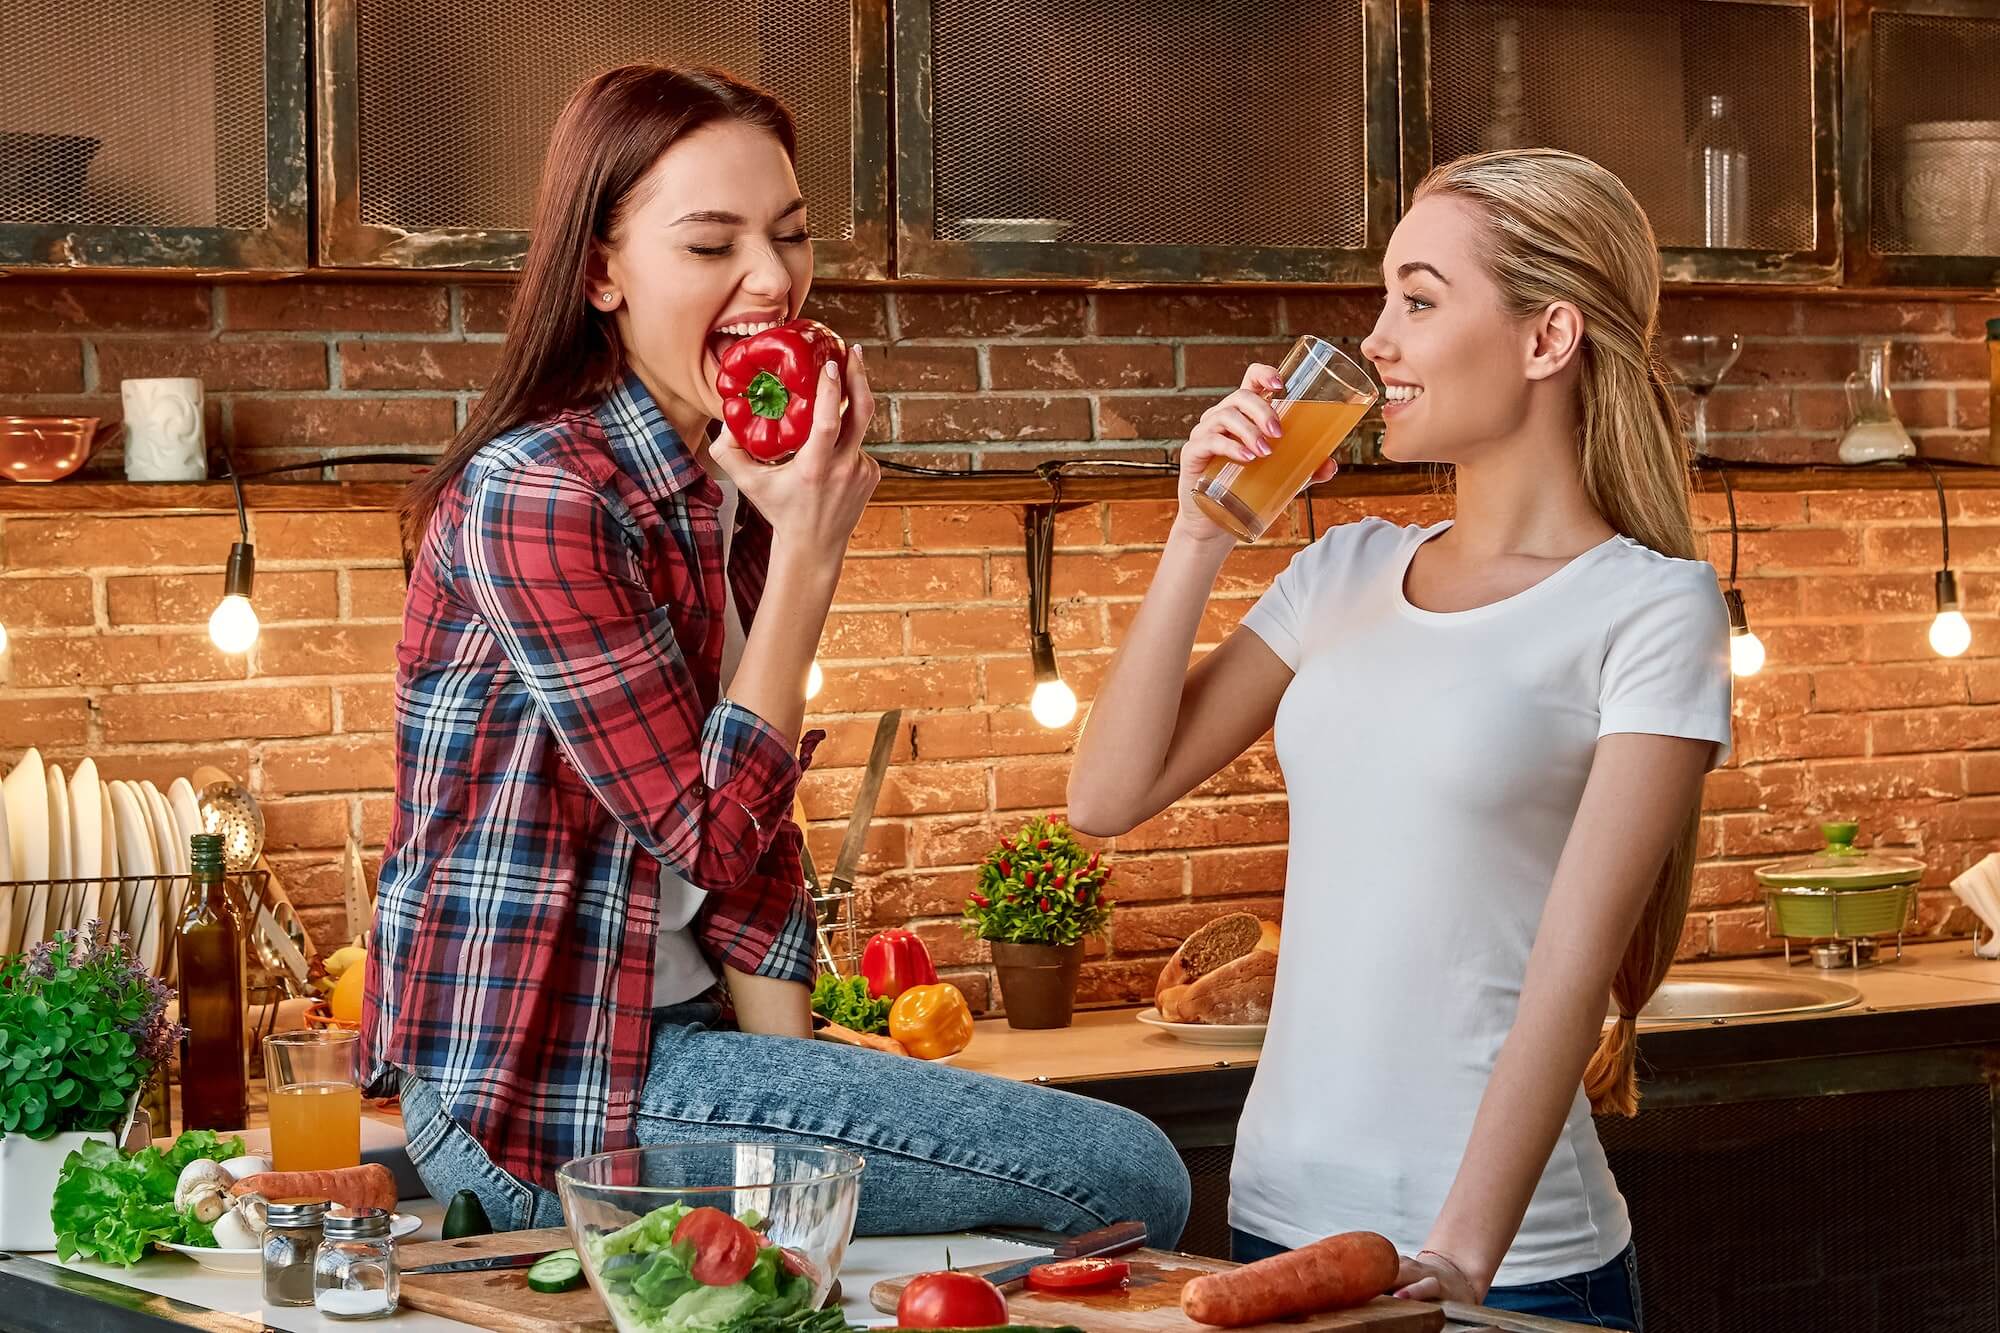 eat-well-to-be-well-young-female-friends-preparing-together-healthy-meal-in-modern-kitchen-cozy-1.jpg